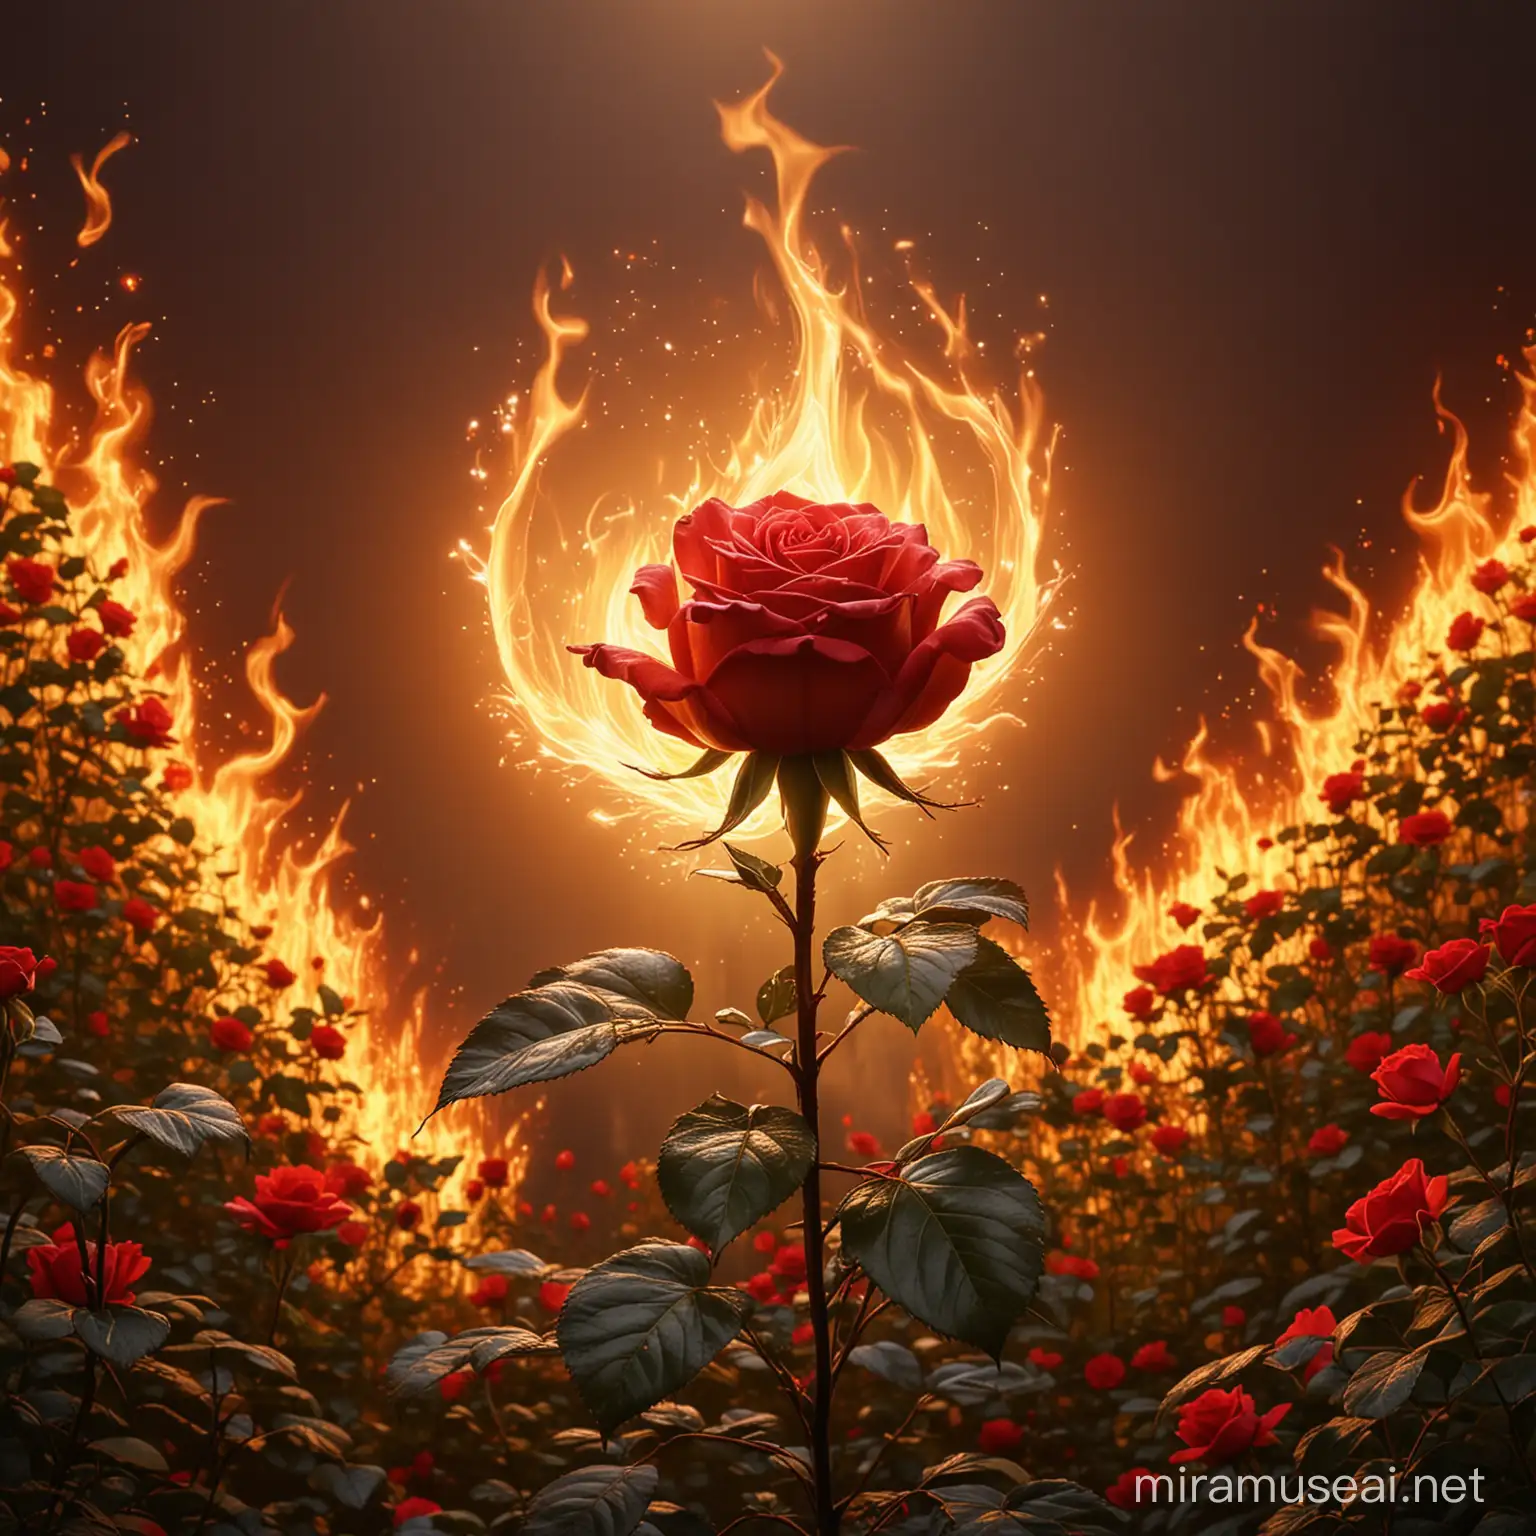 Flaming Red Rose Illuminated by Golden Light in Rose Bush